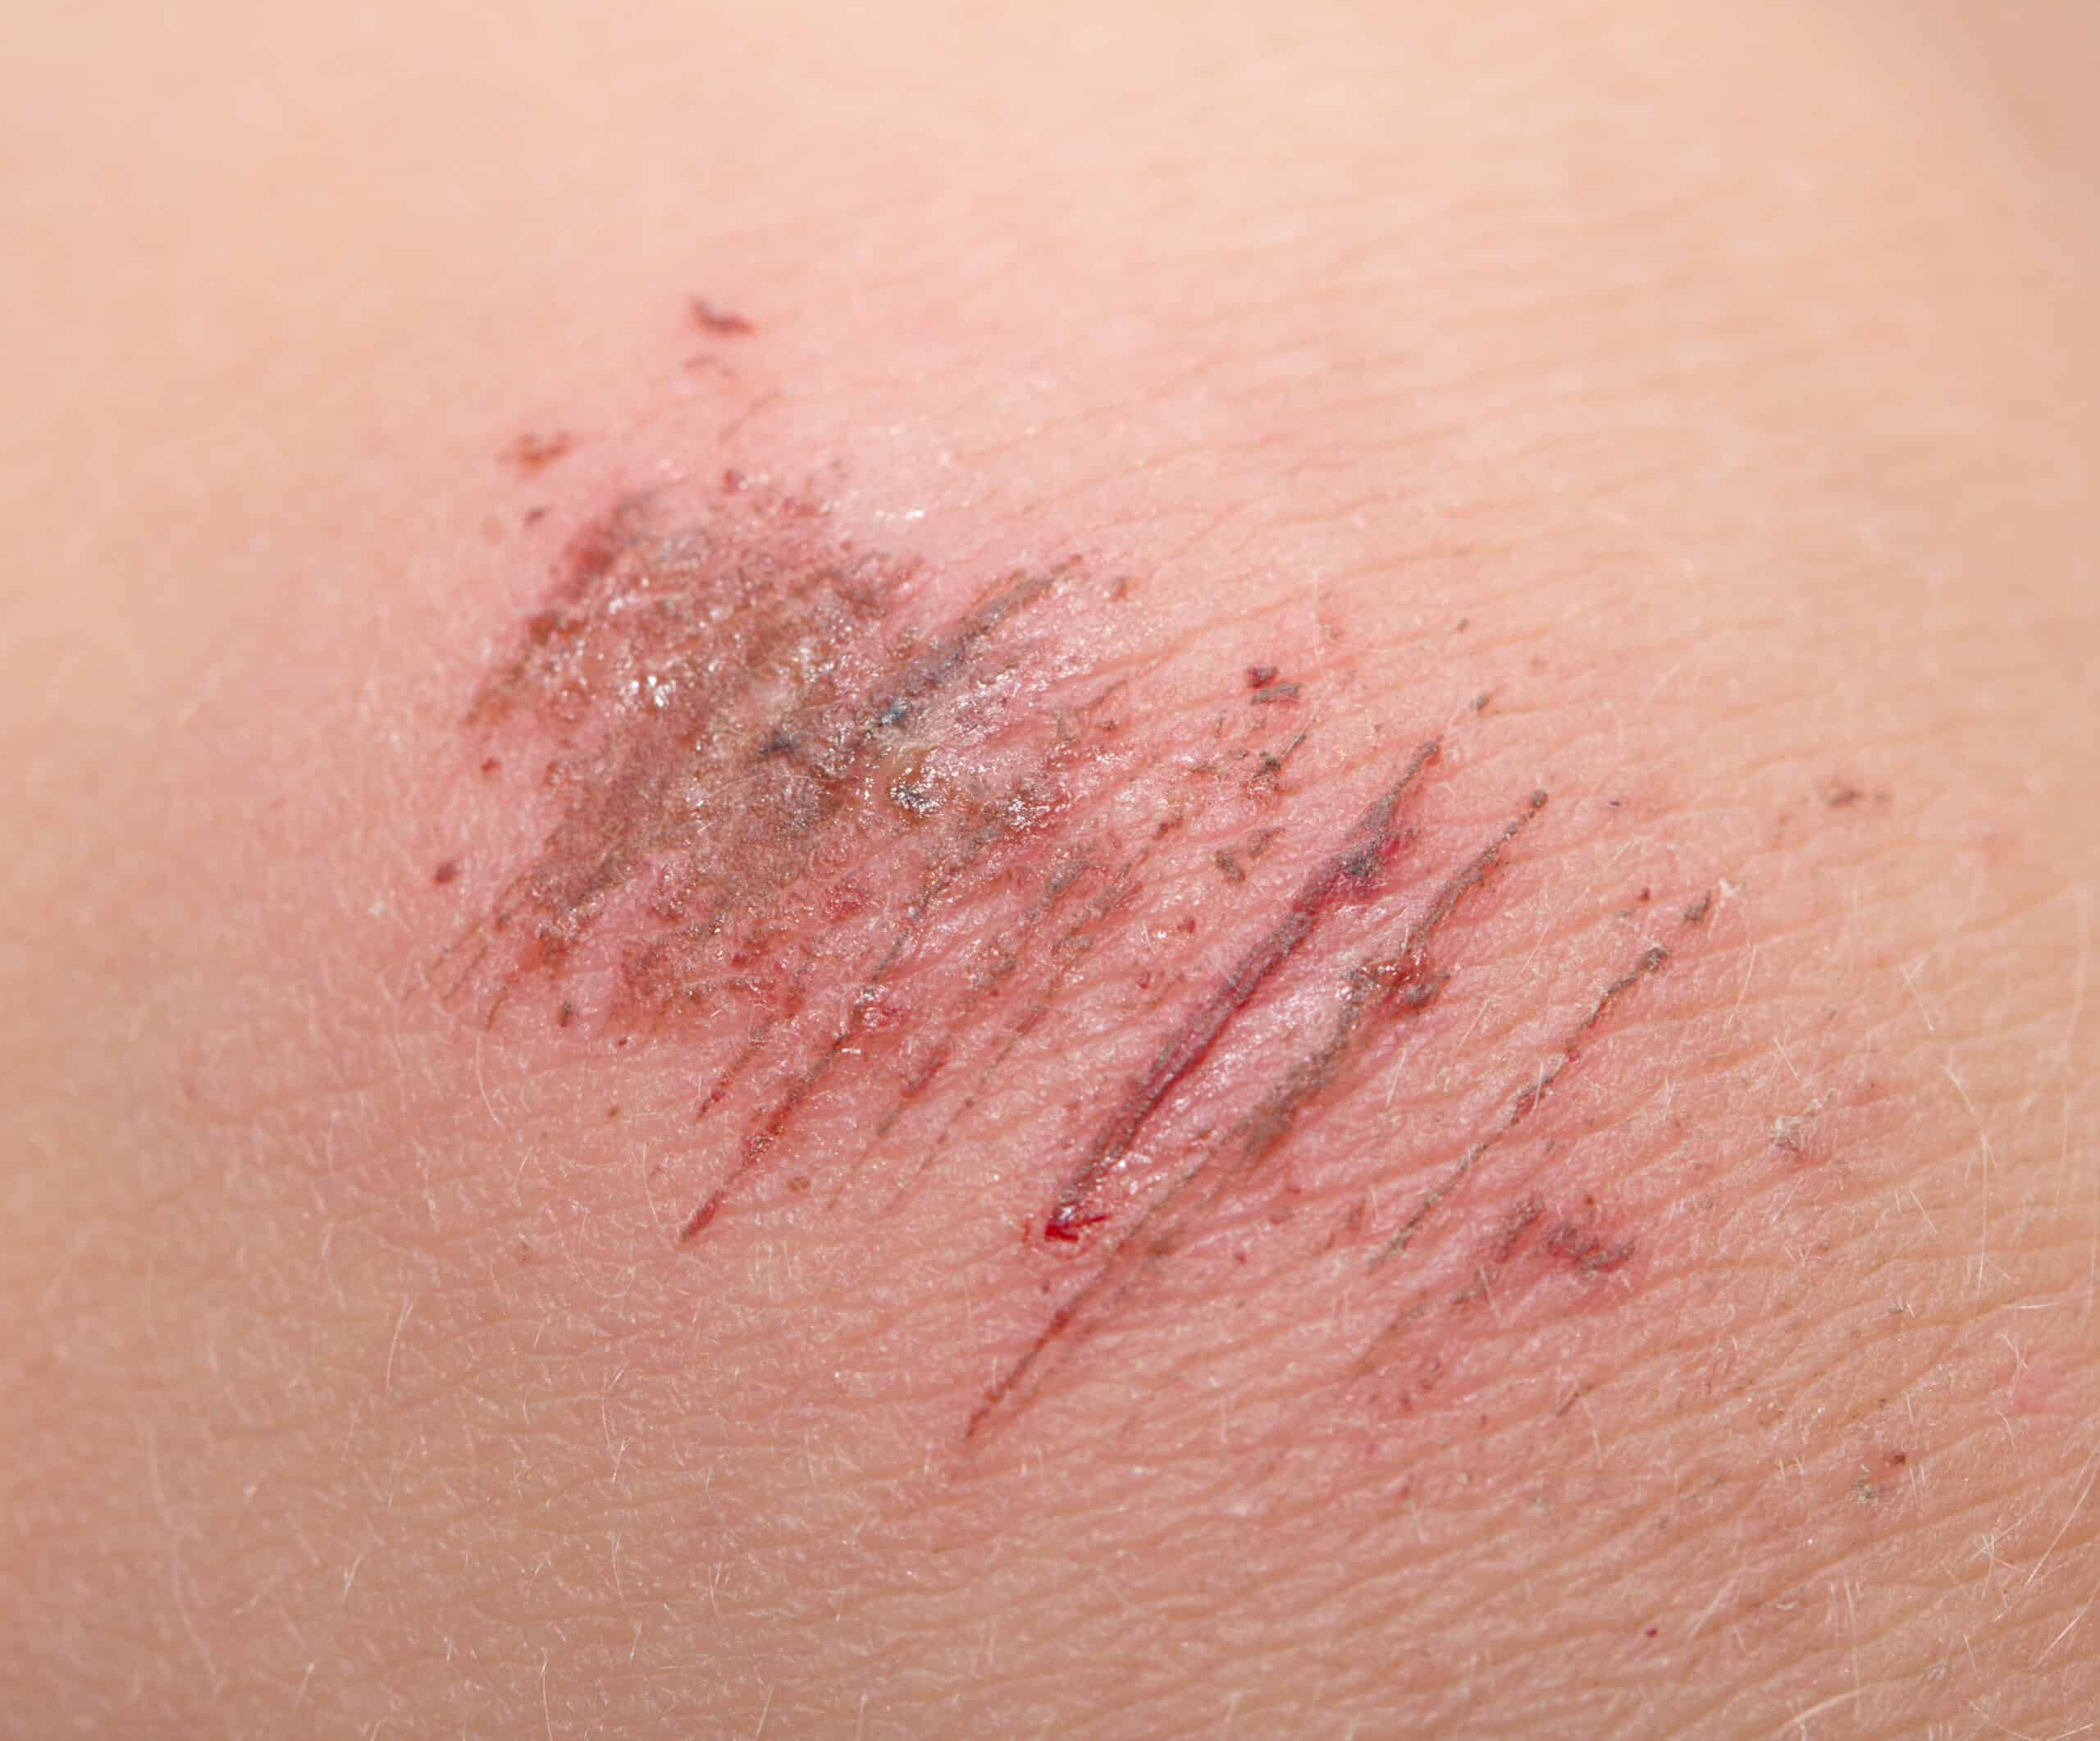 close up image of scratched skin on the knee